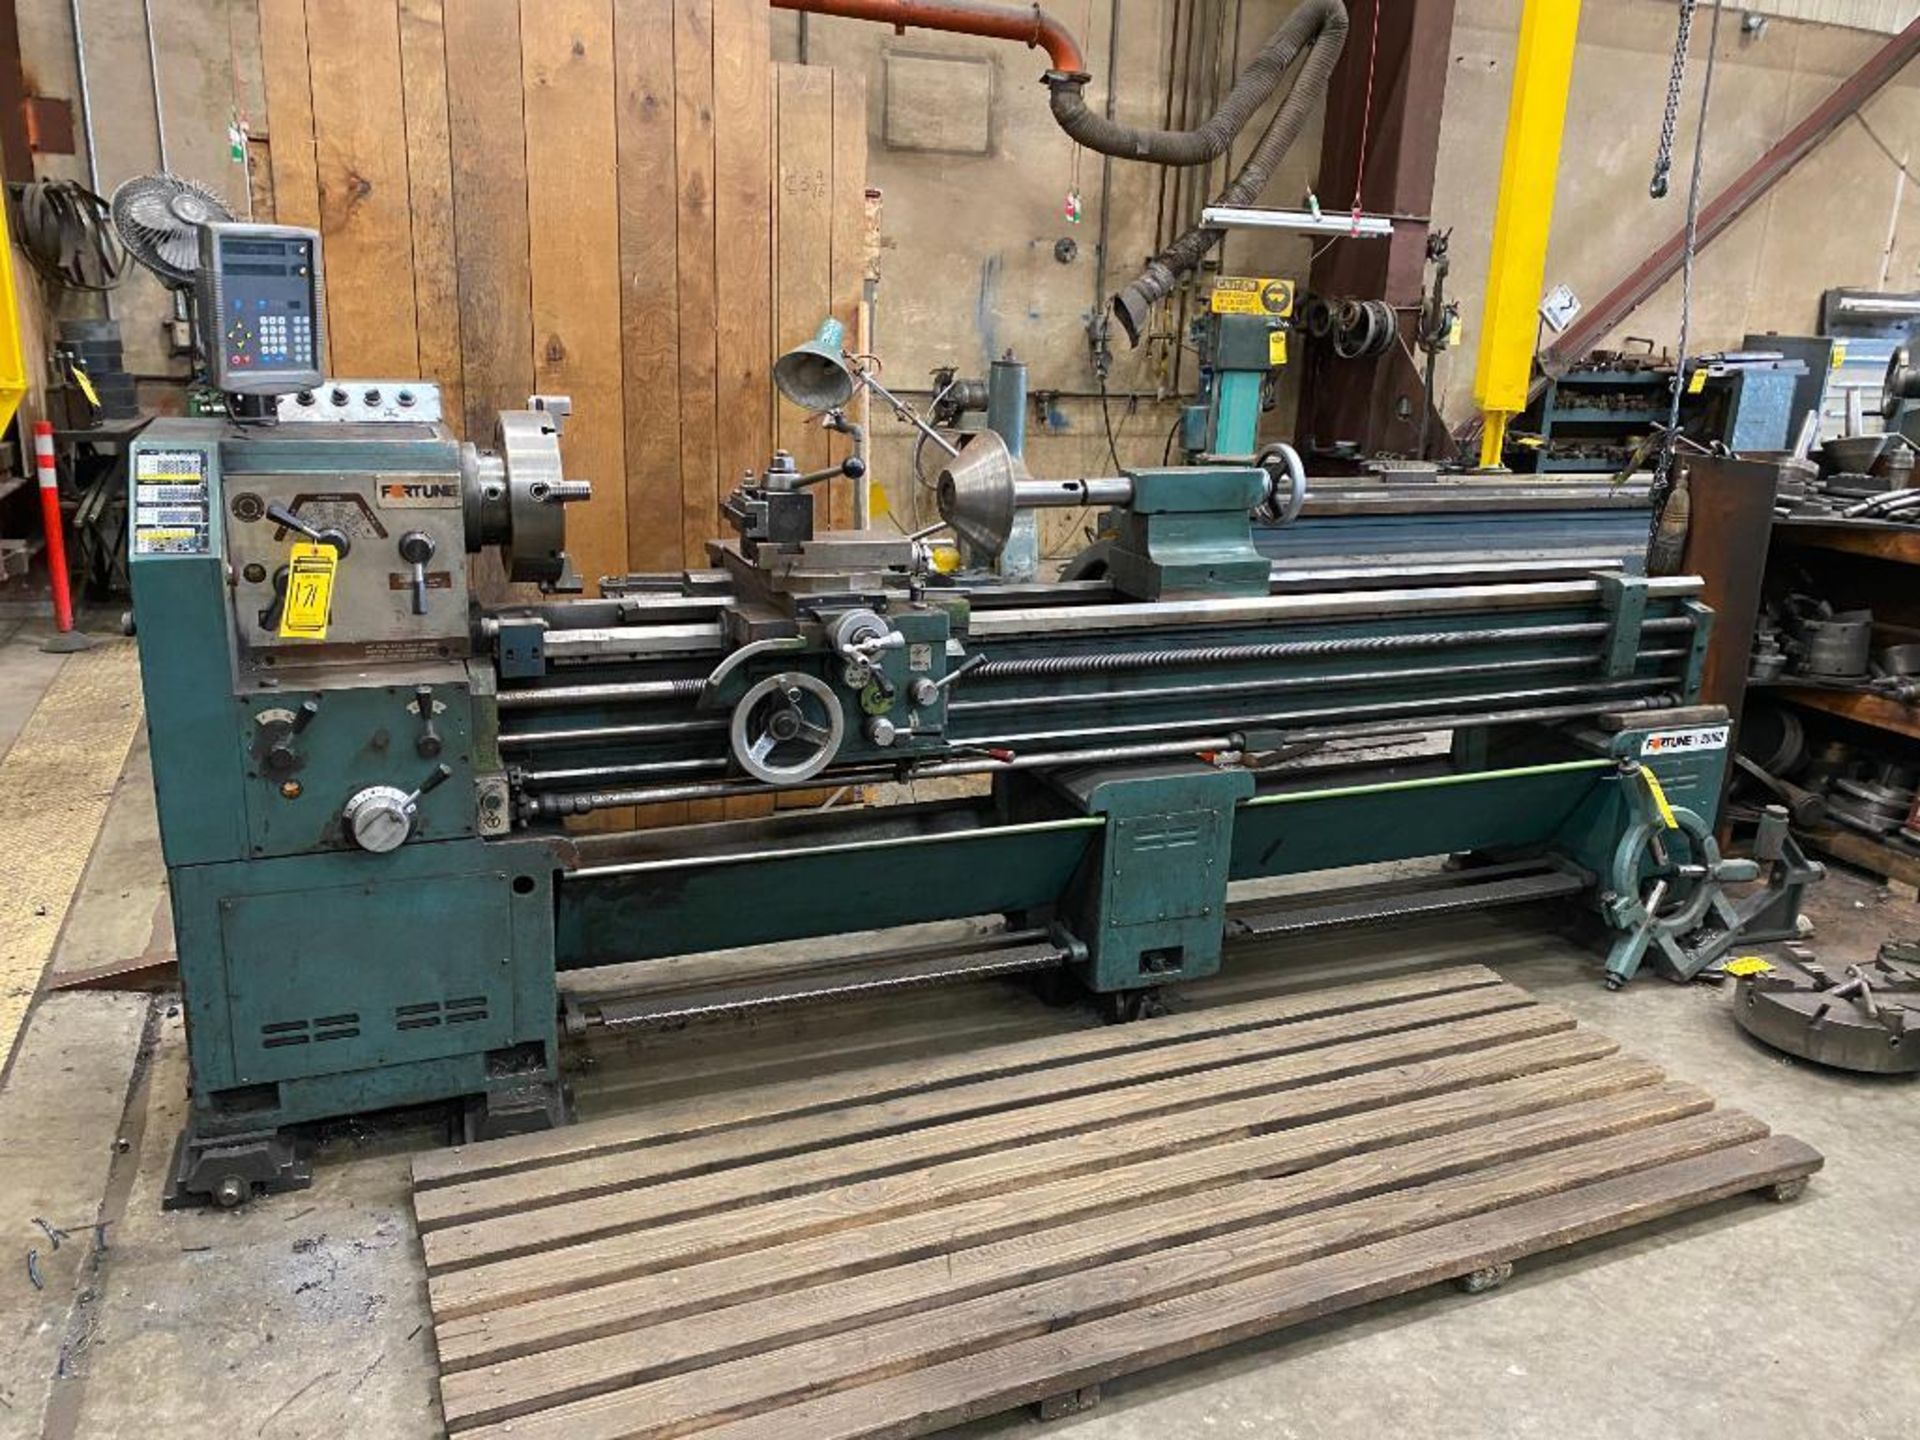 Fortune 20100 Lathe w/ Newall Readout, 118" x 14" Bed, 12" 4-Jaw Chuck, Carriage, Tool-Post, Tailsto